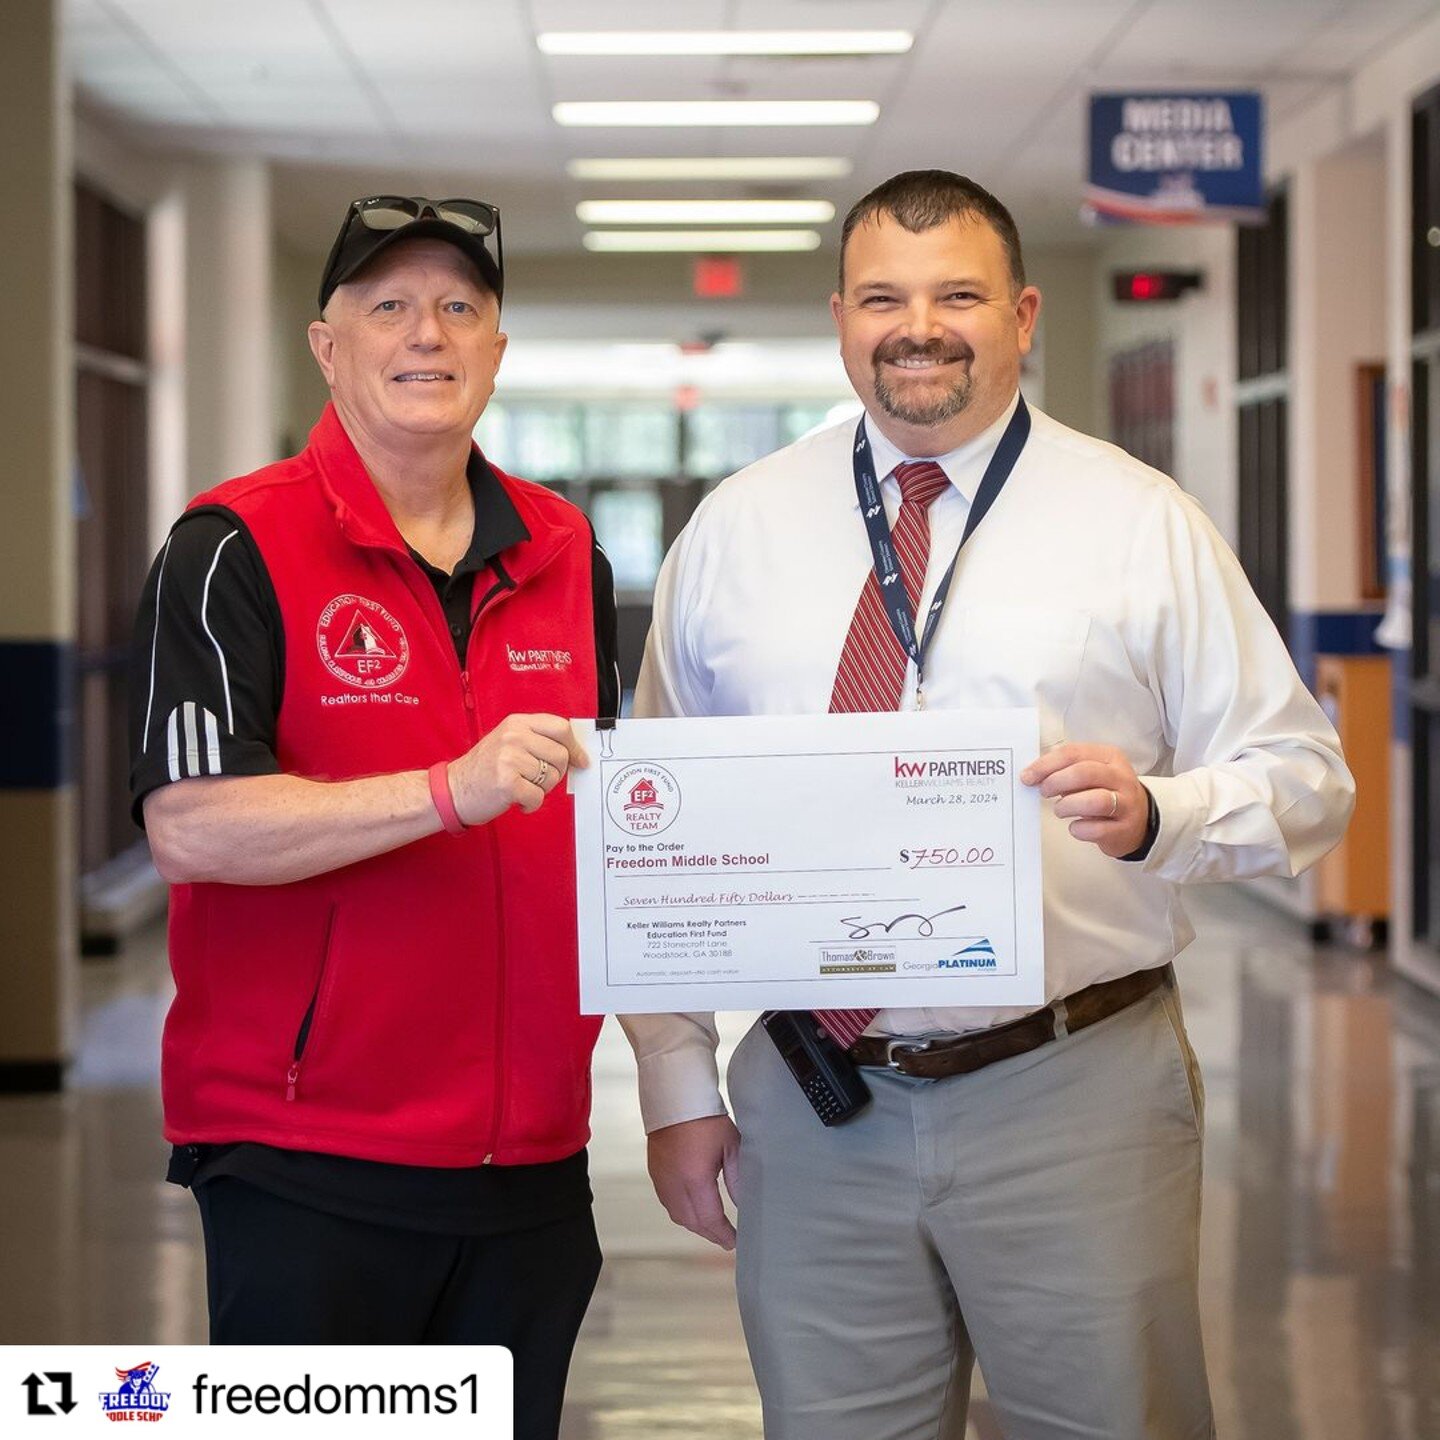 Happy to help you all in any way we can, and thanks for having us! 😊
#Repost @freedomms1
・・・
A big thank you to EF2 Realty Team with Keller Williams. They sponsored our February Professional Development. The training was catered by Moe&rsquo;s South